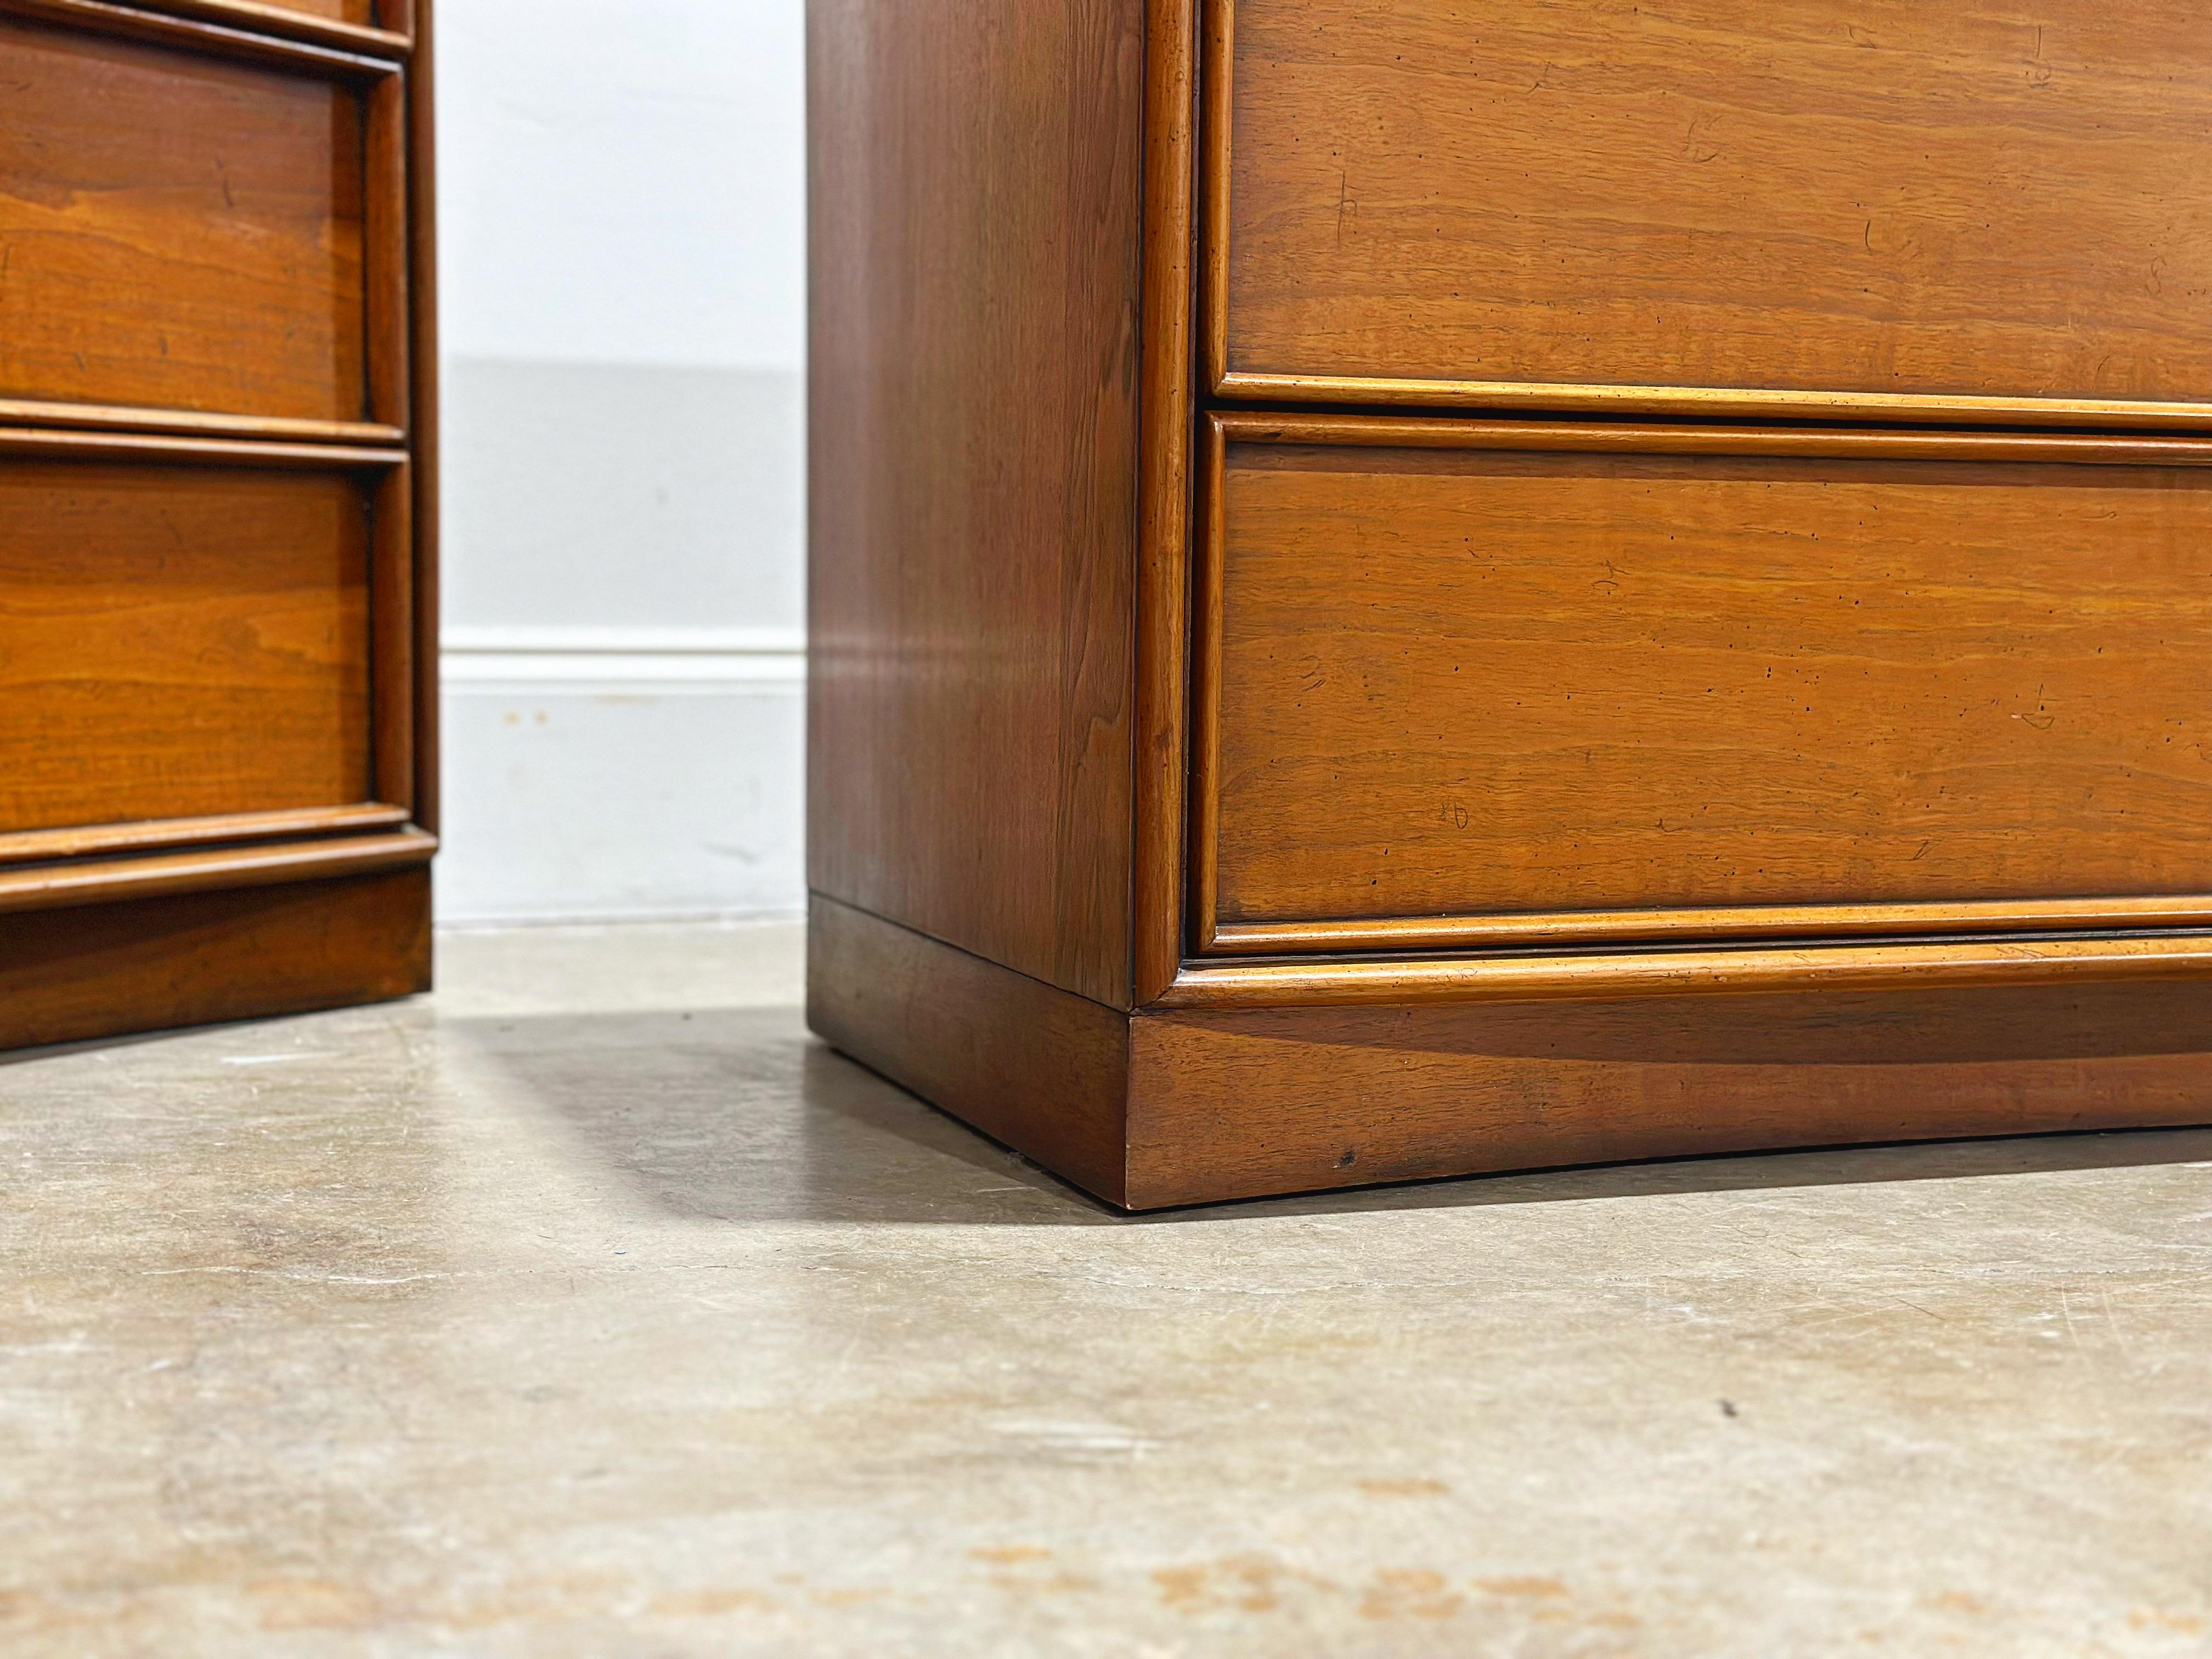 Scarce pair of walnut bachelors chests / nightstands / dressers by TH Robsjohn Gibbings for Widdicomb, circa late 1950s. Three drawers resting on Gibbings' signature curved plinth base. Gorgeous medium tone walnut, stellar understated design and top